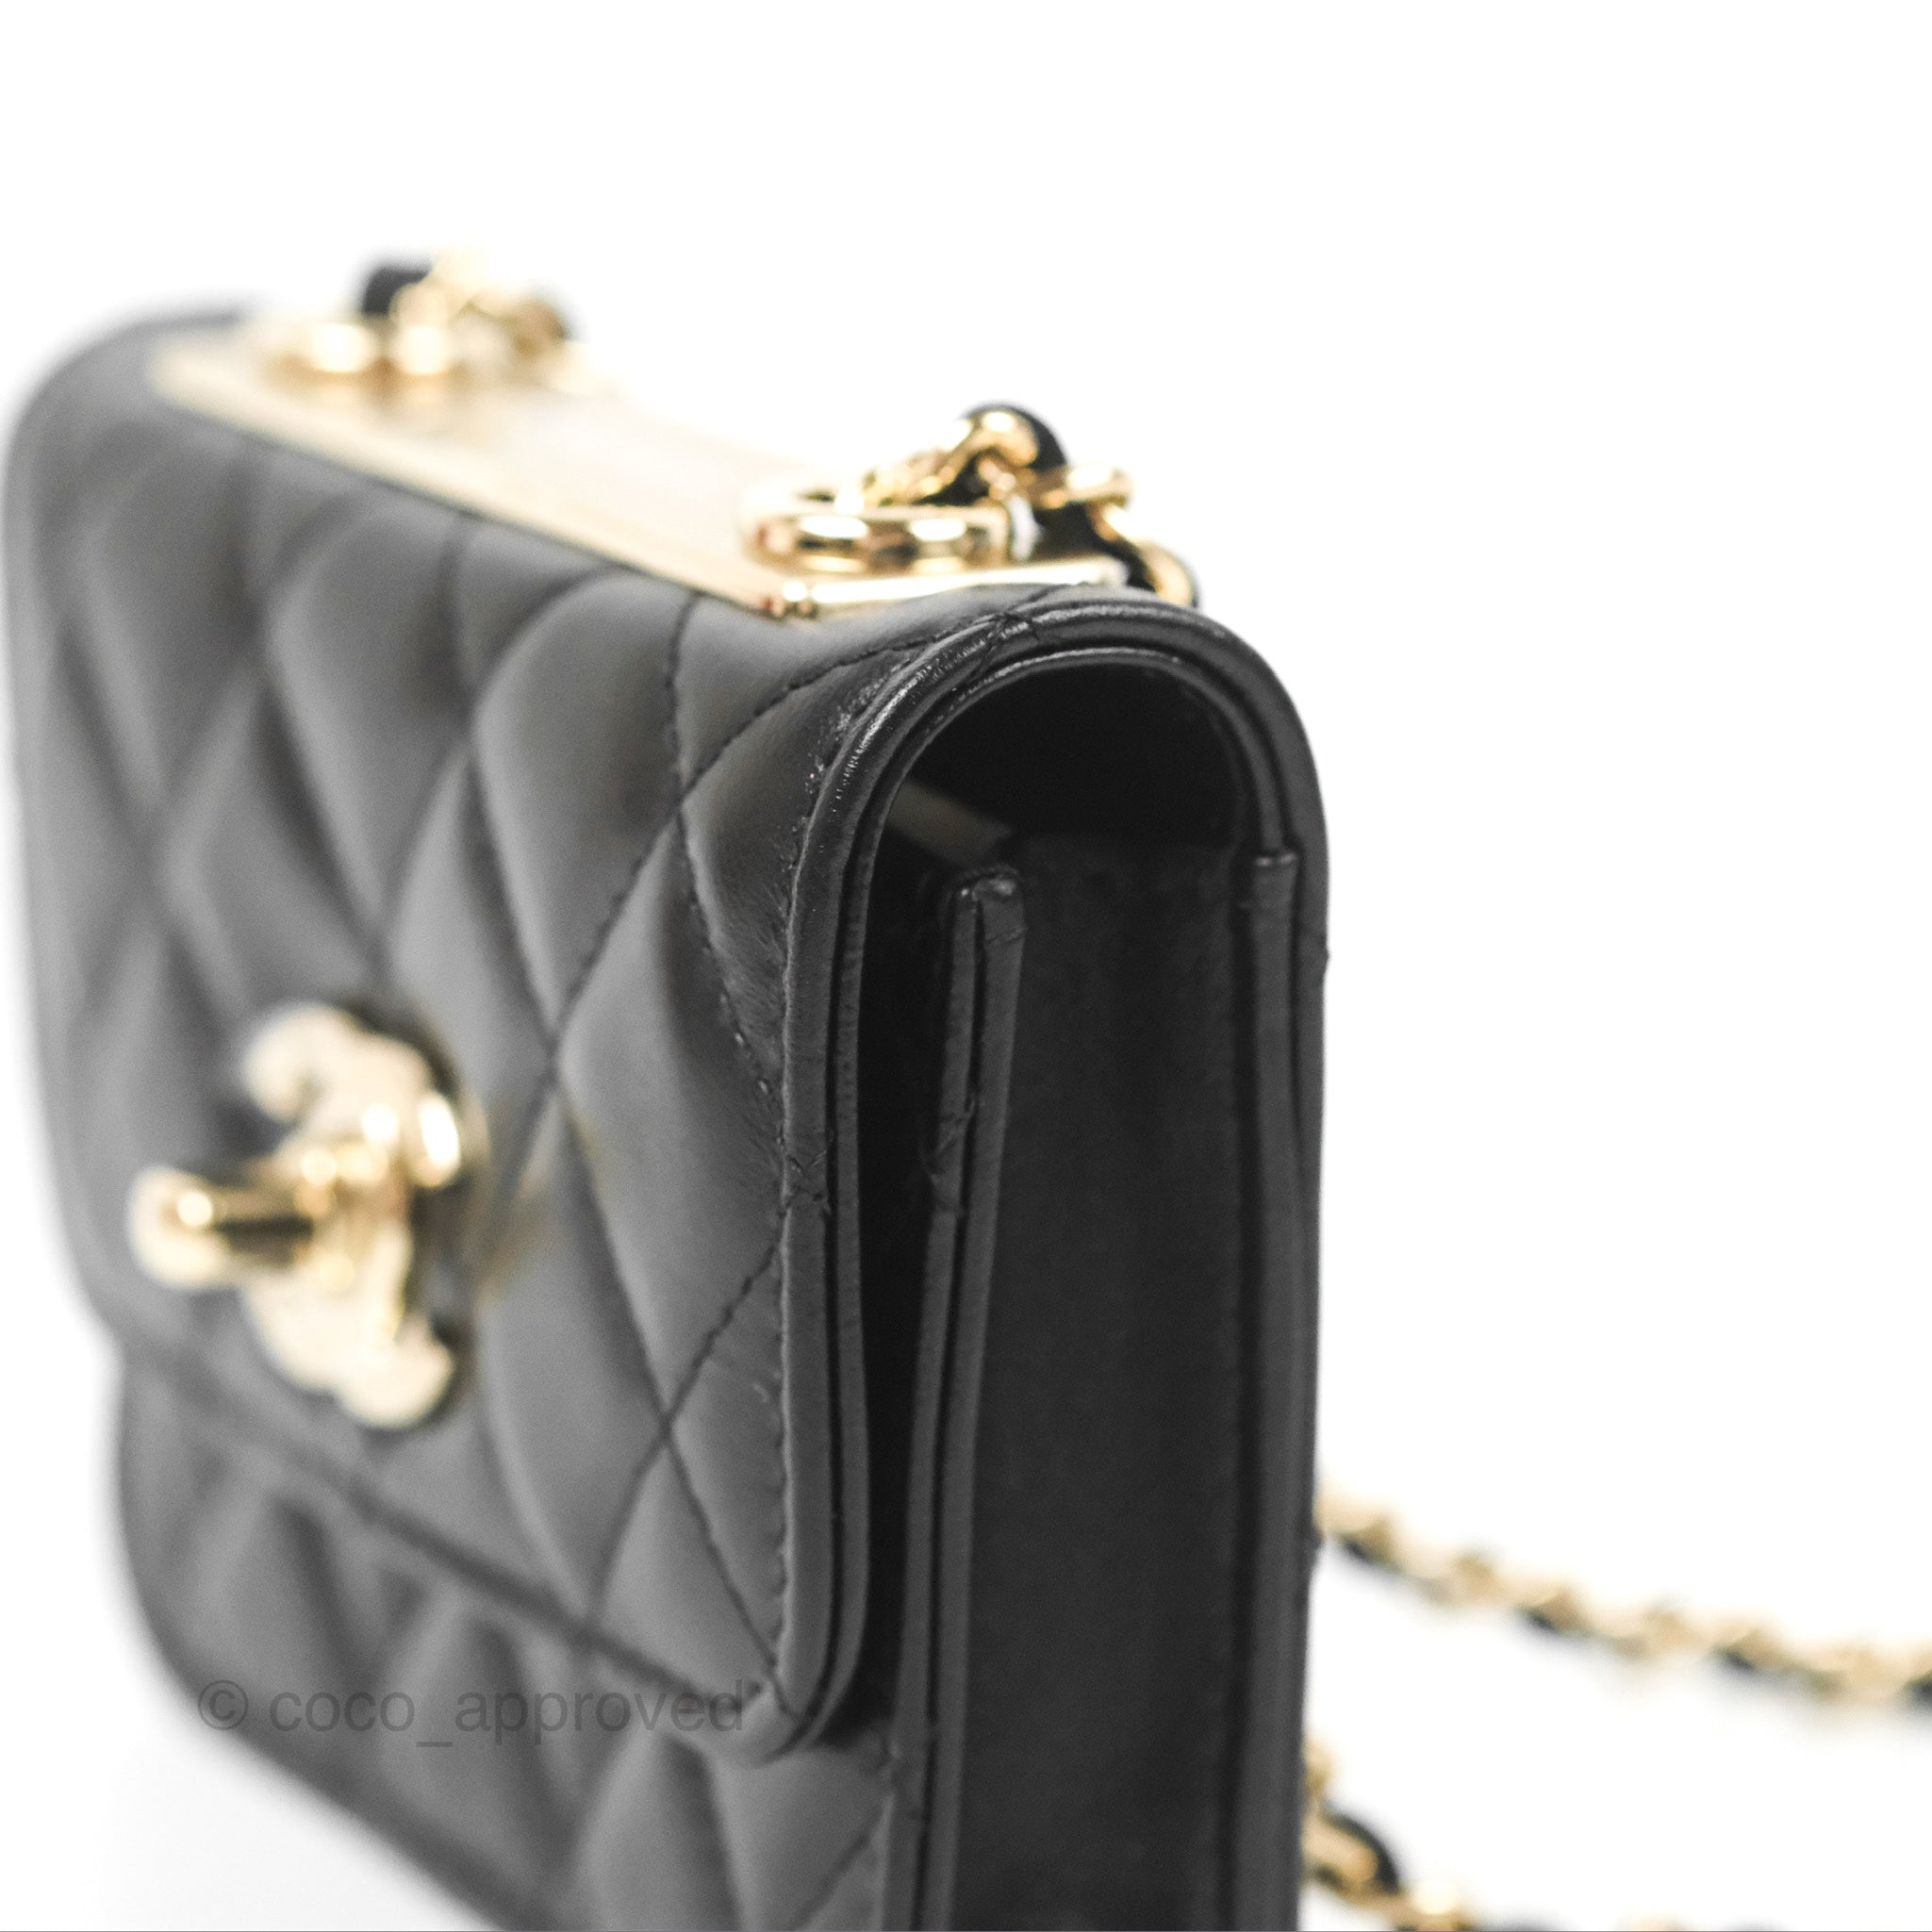 Chanel Card Holder: Chic Alternative to the Chanel Wallet on Chain